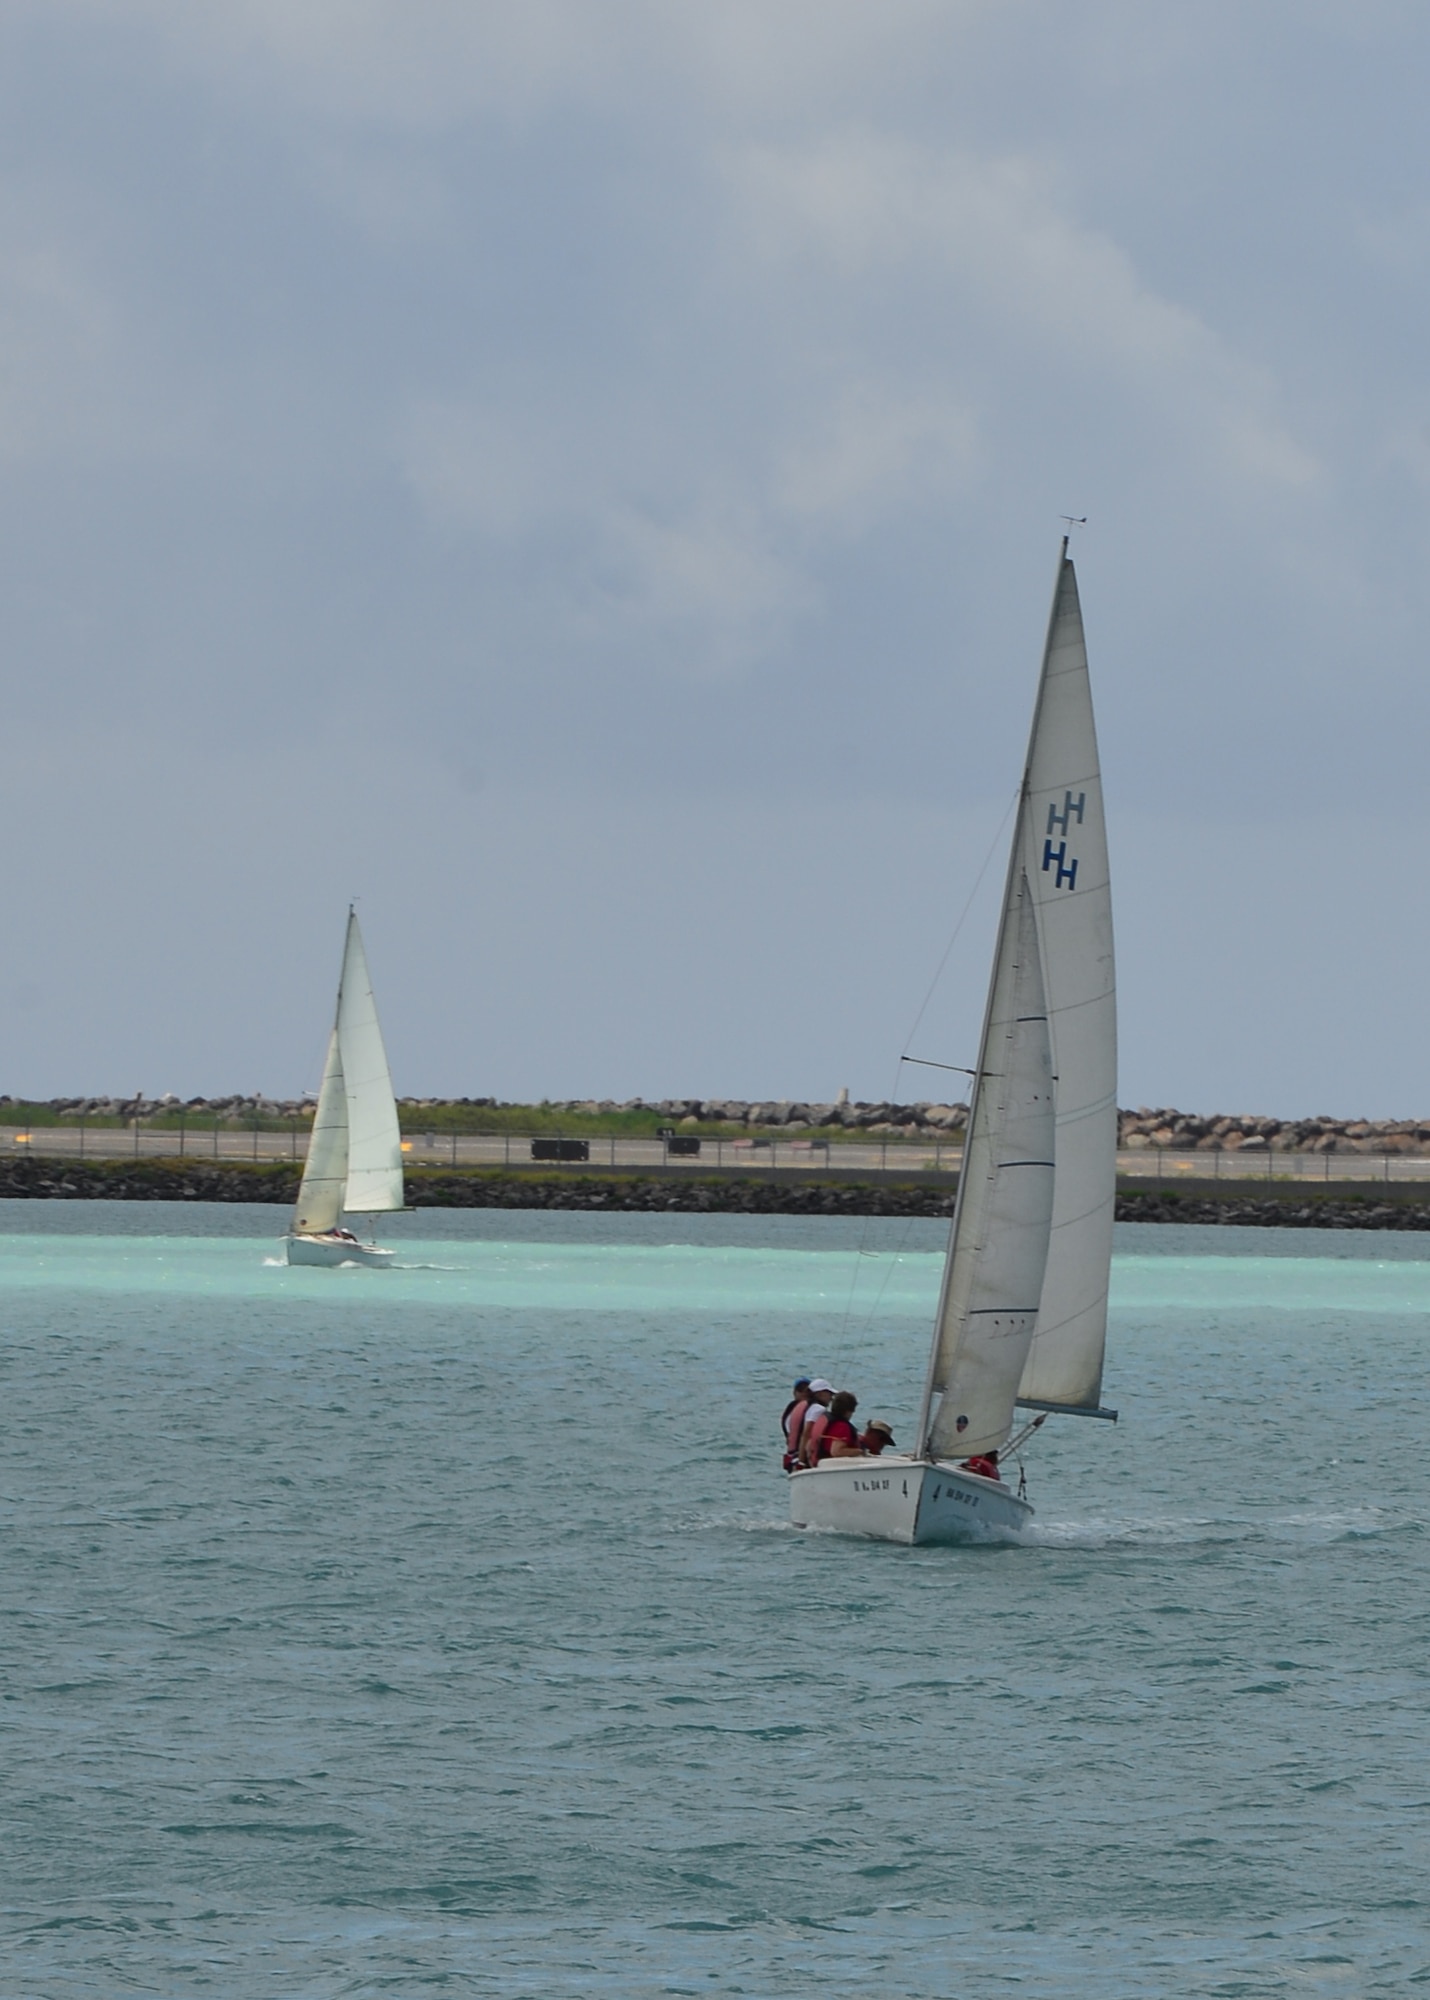 Members of the Wet Hens Sailing group sail around Hickam Harbor during the 55th anniversary reunion celebration on Joint Base Pearl Harbor-Hickam, June 30, 2016. In 1961, the group was founded by Air Force wives that learned to sail from then harbormaster, Lou Foster. Early in their training, he referred to his students as a bunch of "wet hens," and the name stuck. After learning to sail, the women wanted to share their newfound skills with other women. So those first "Wet Hens" started a tradition that has lasted 55 years. (U.S. Air Force photo by Teach. Sgt. Aaron Oelrich/Realeased) 